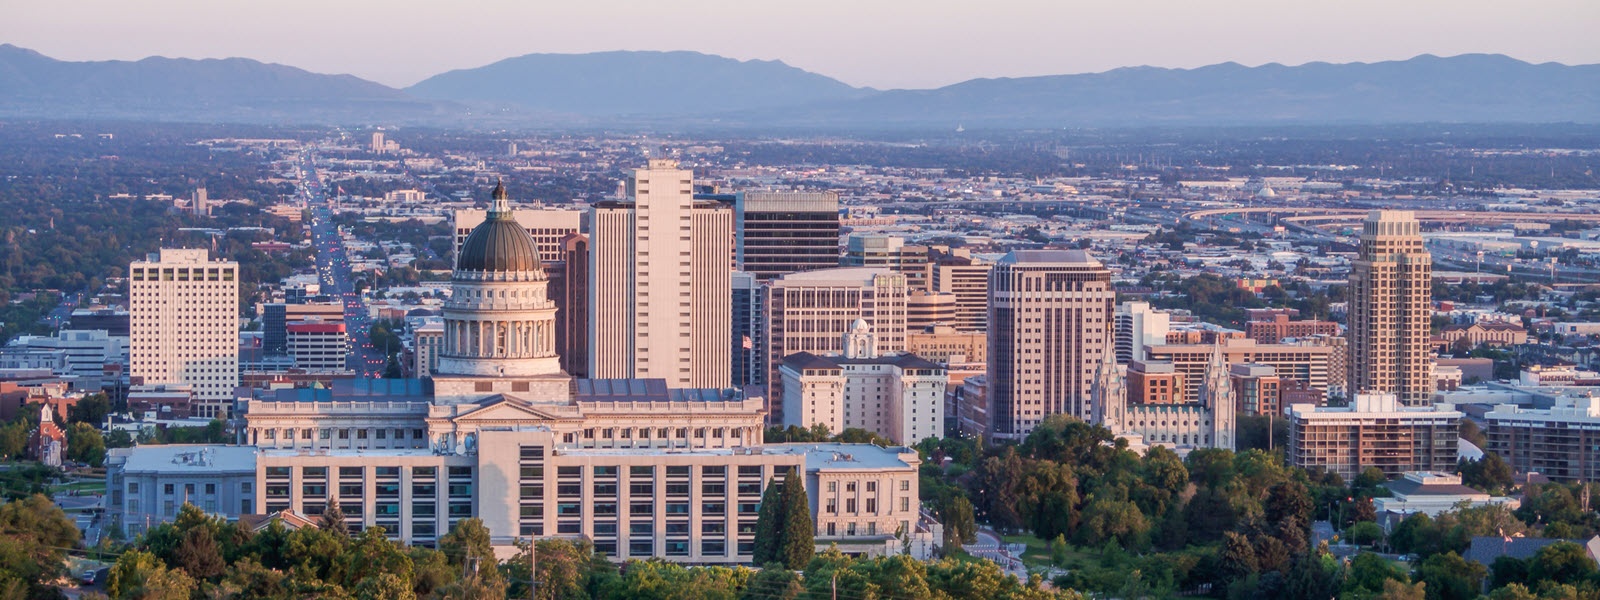 What are downtown Salt Lake City's prospects in 2021?